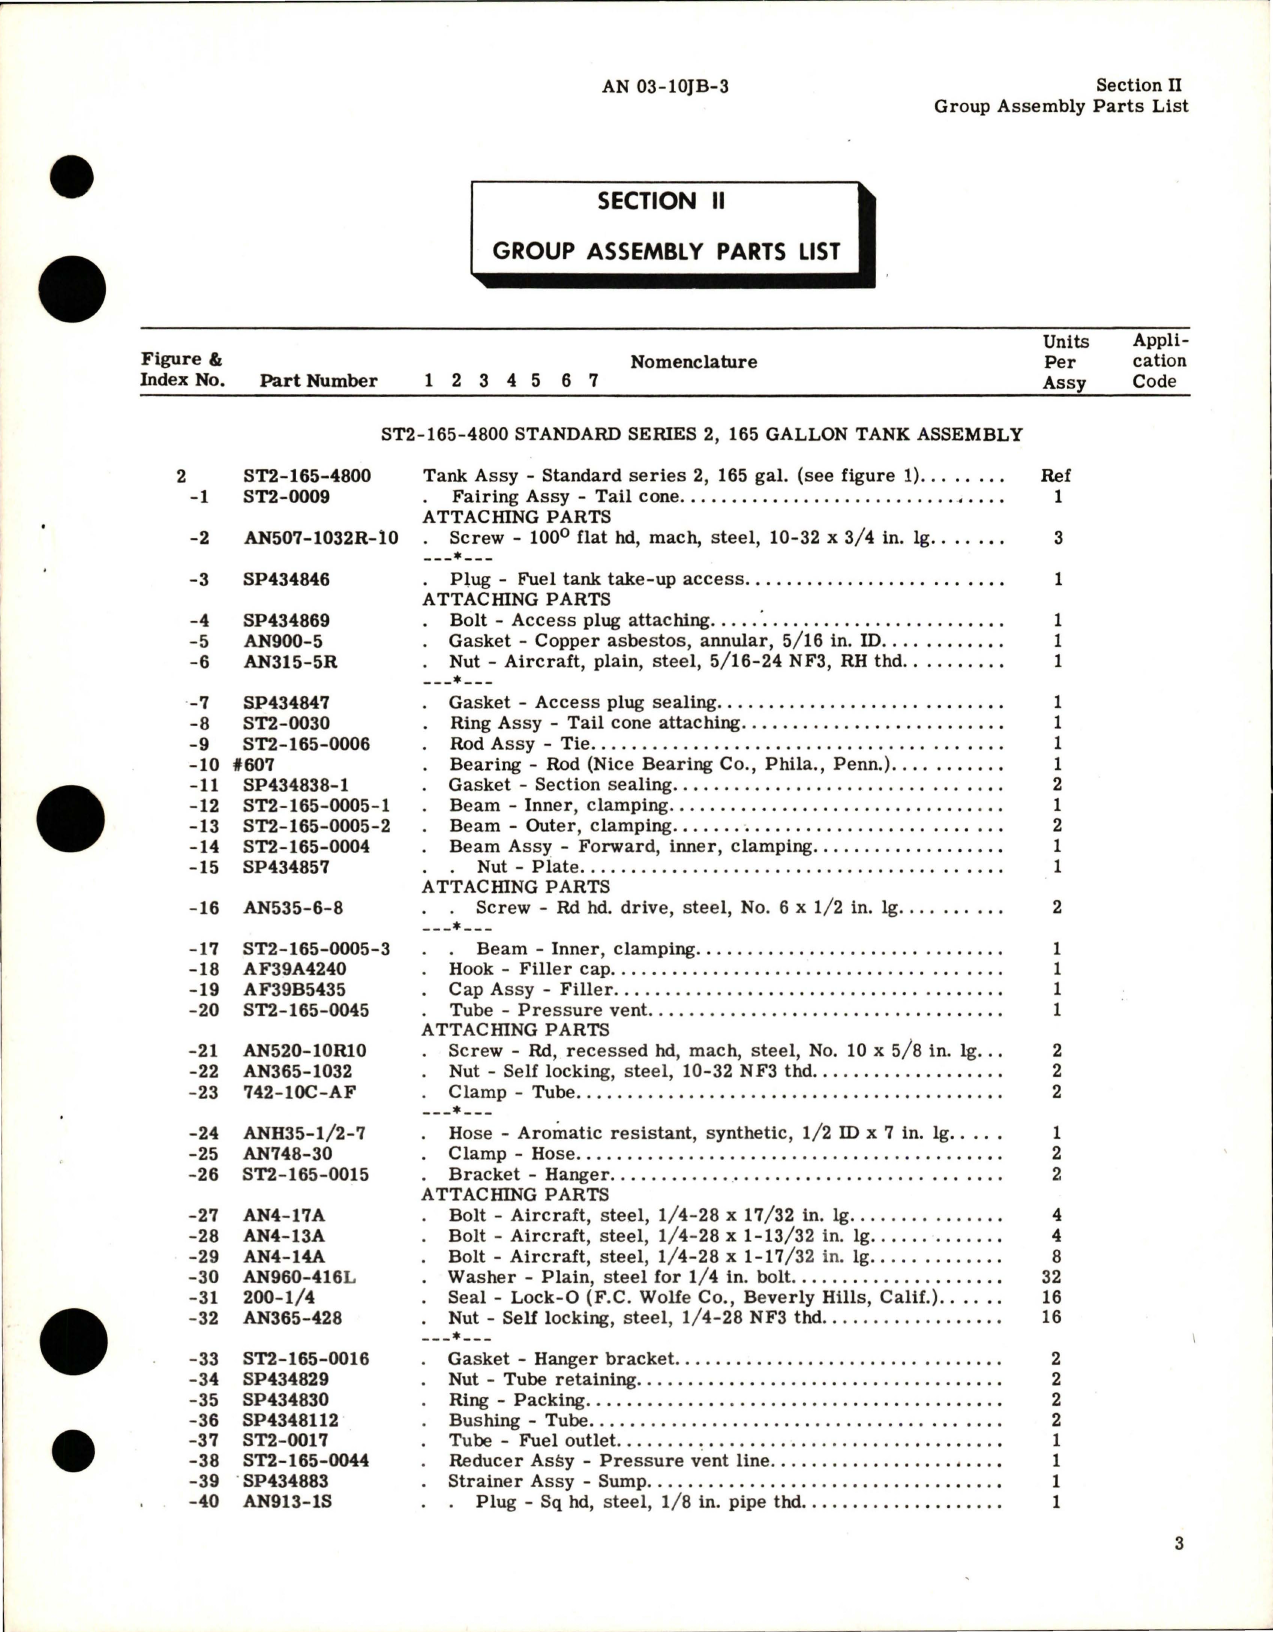 Sample page 5 from AirCorps Library document: Parts Catalog for External Jettison Fuel Tank - 165 Gallons Capacity - Parts ST2-165-4800 and ST2-165-4803